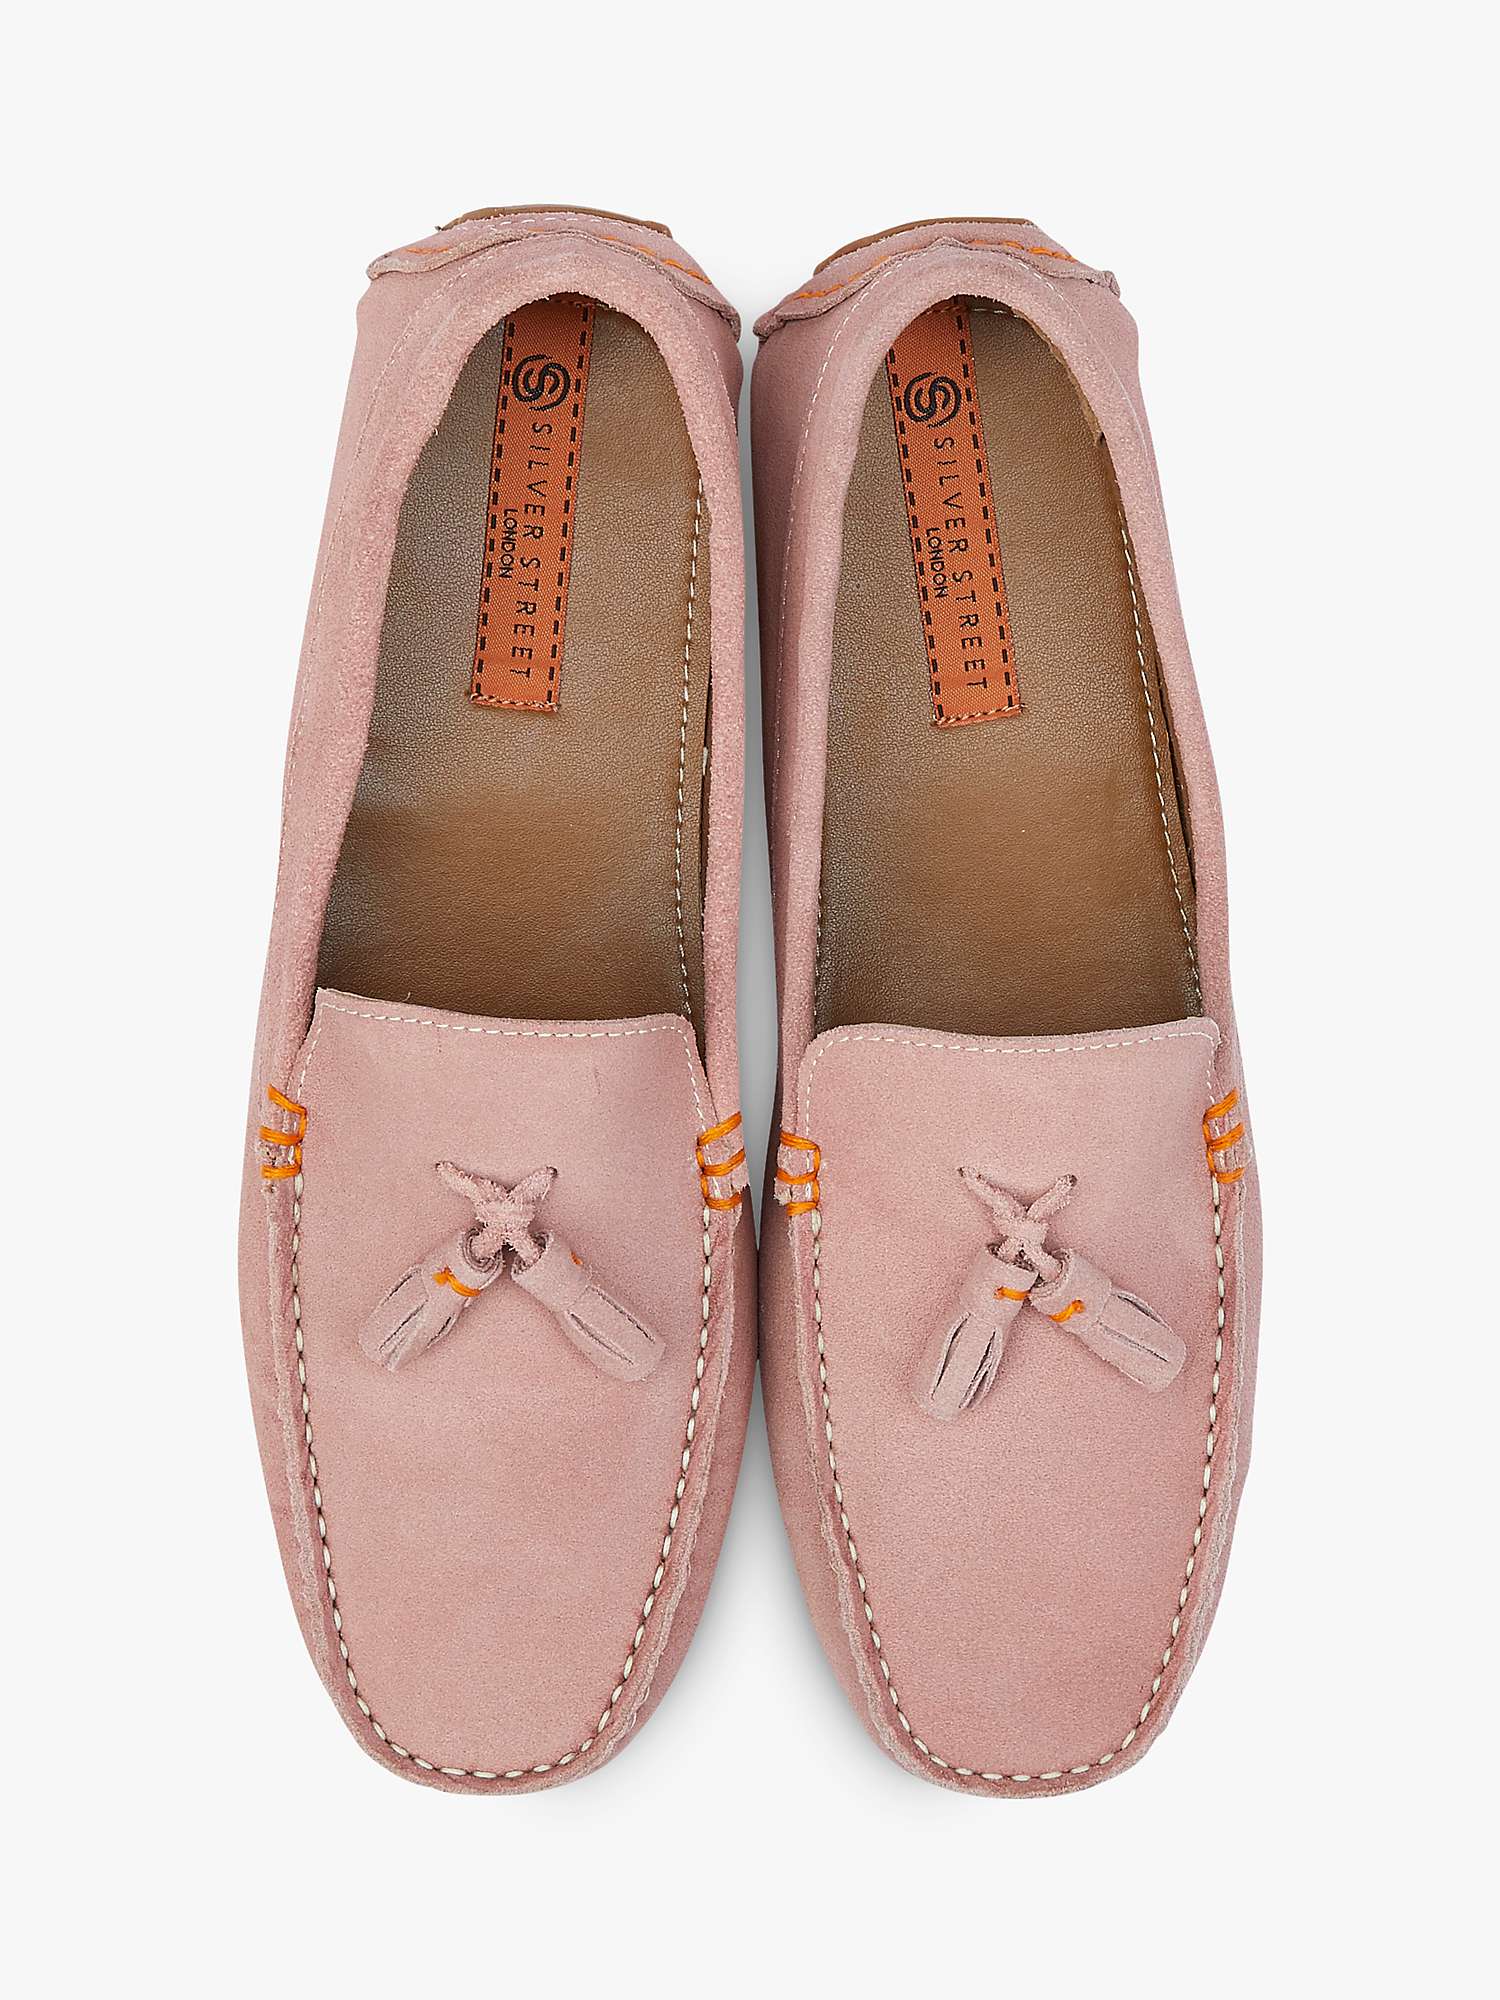 Buy Silver Street London Jackson Suede Loafers Online at johnlewis.com